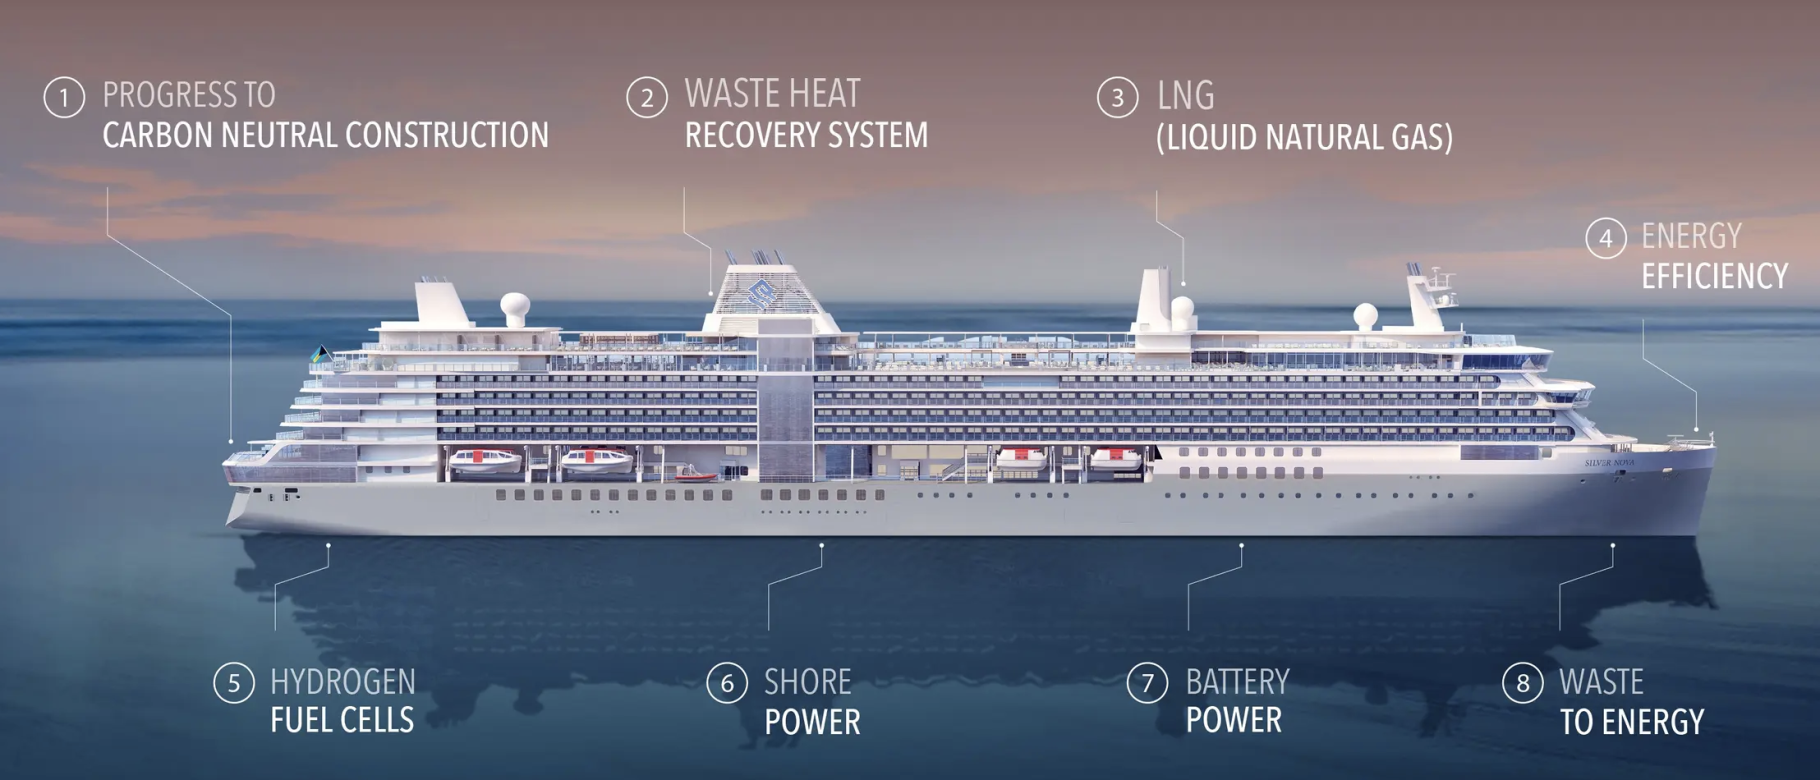 Silversea claims the most sustainable ship with Silver Nova